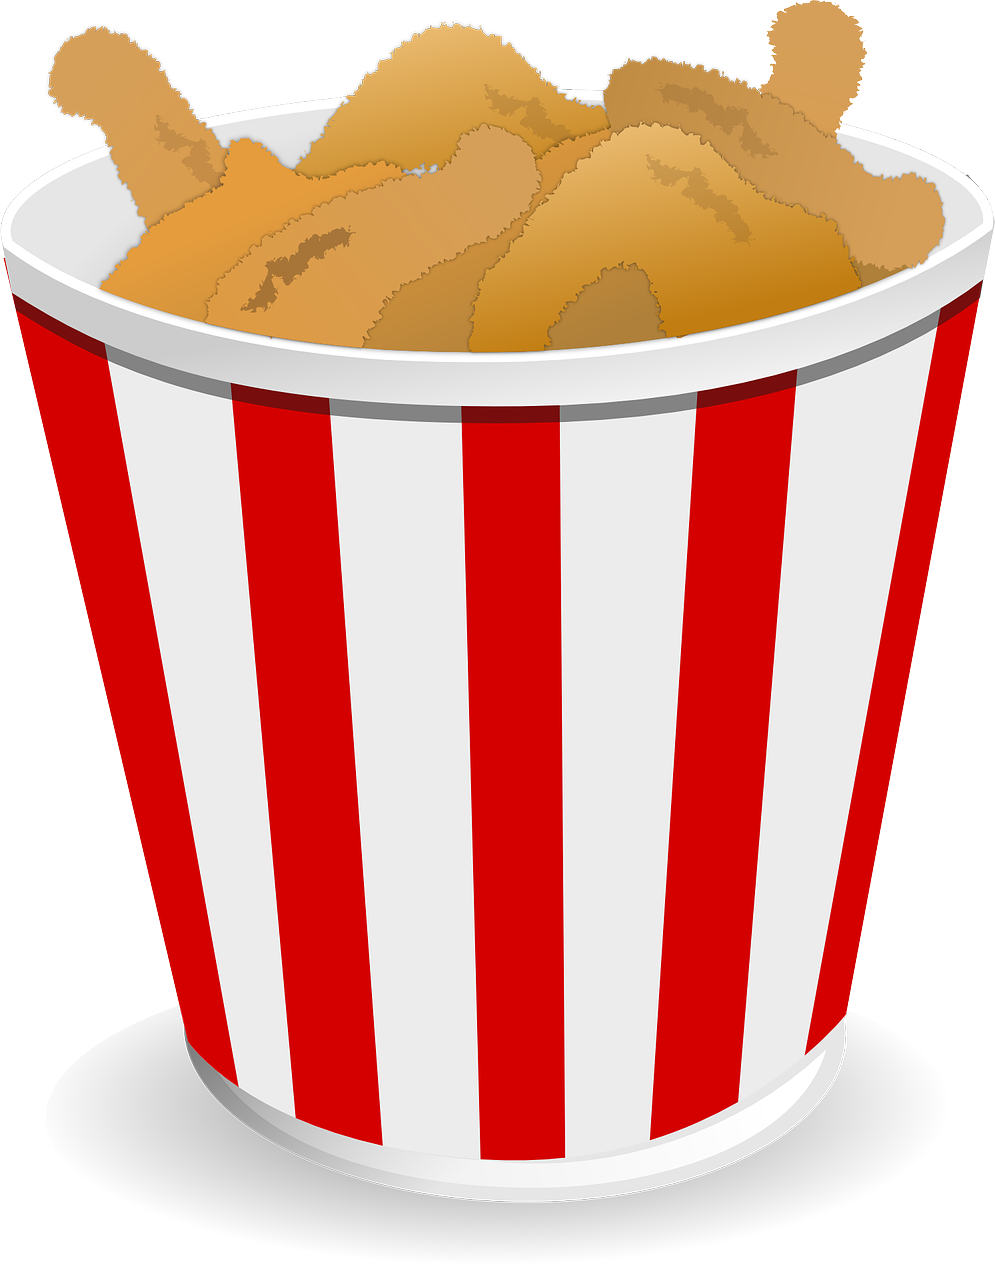 Fried Chicken Bucket PNG Free Download